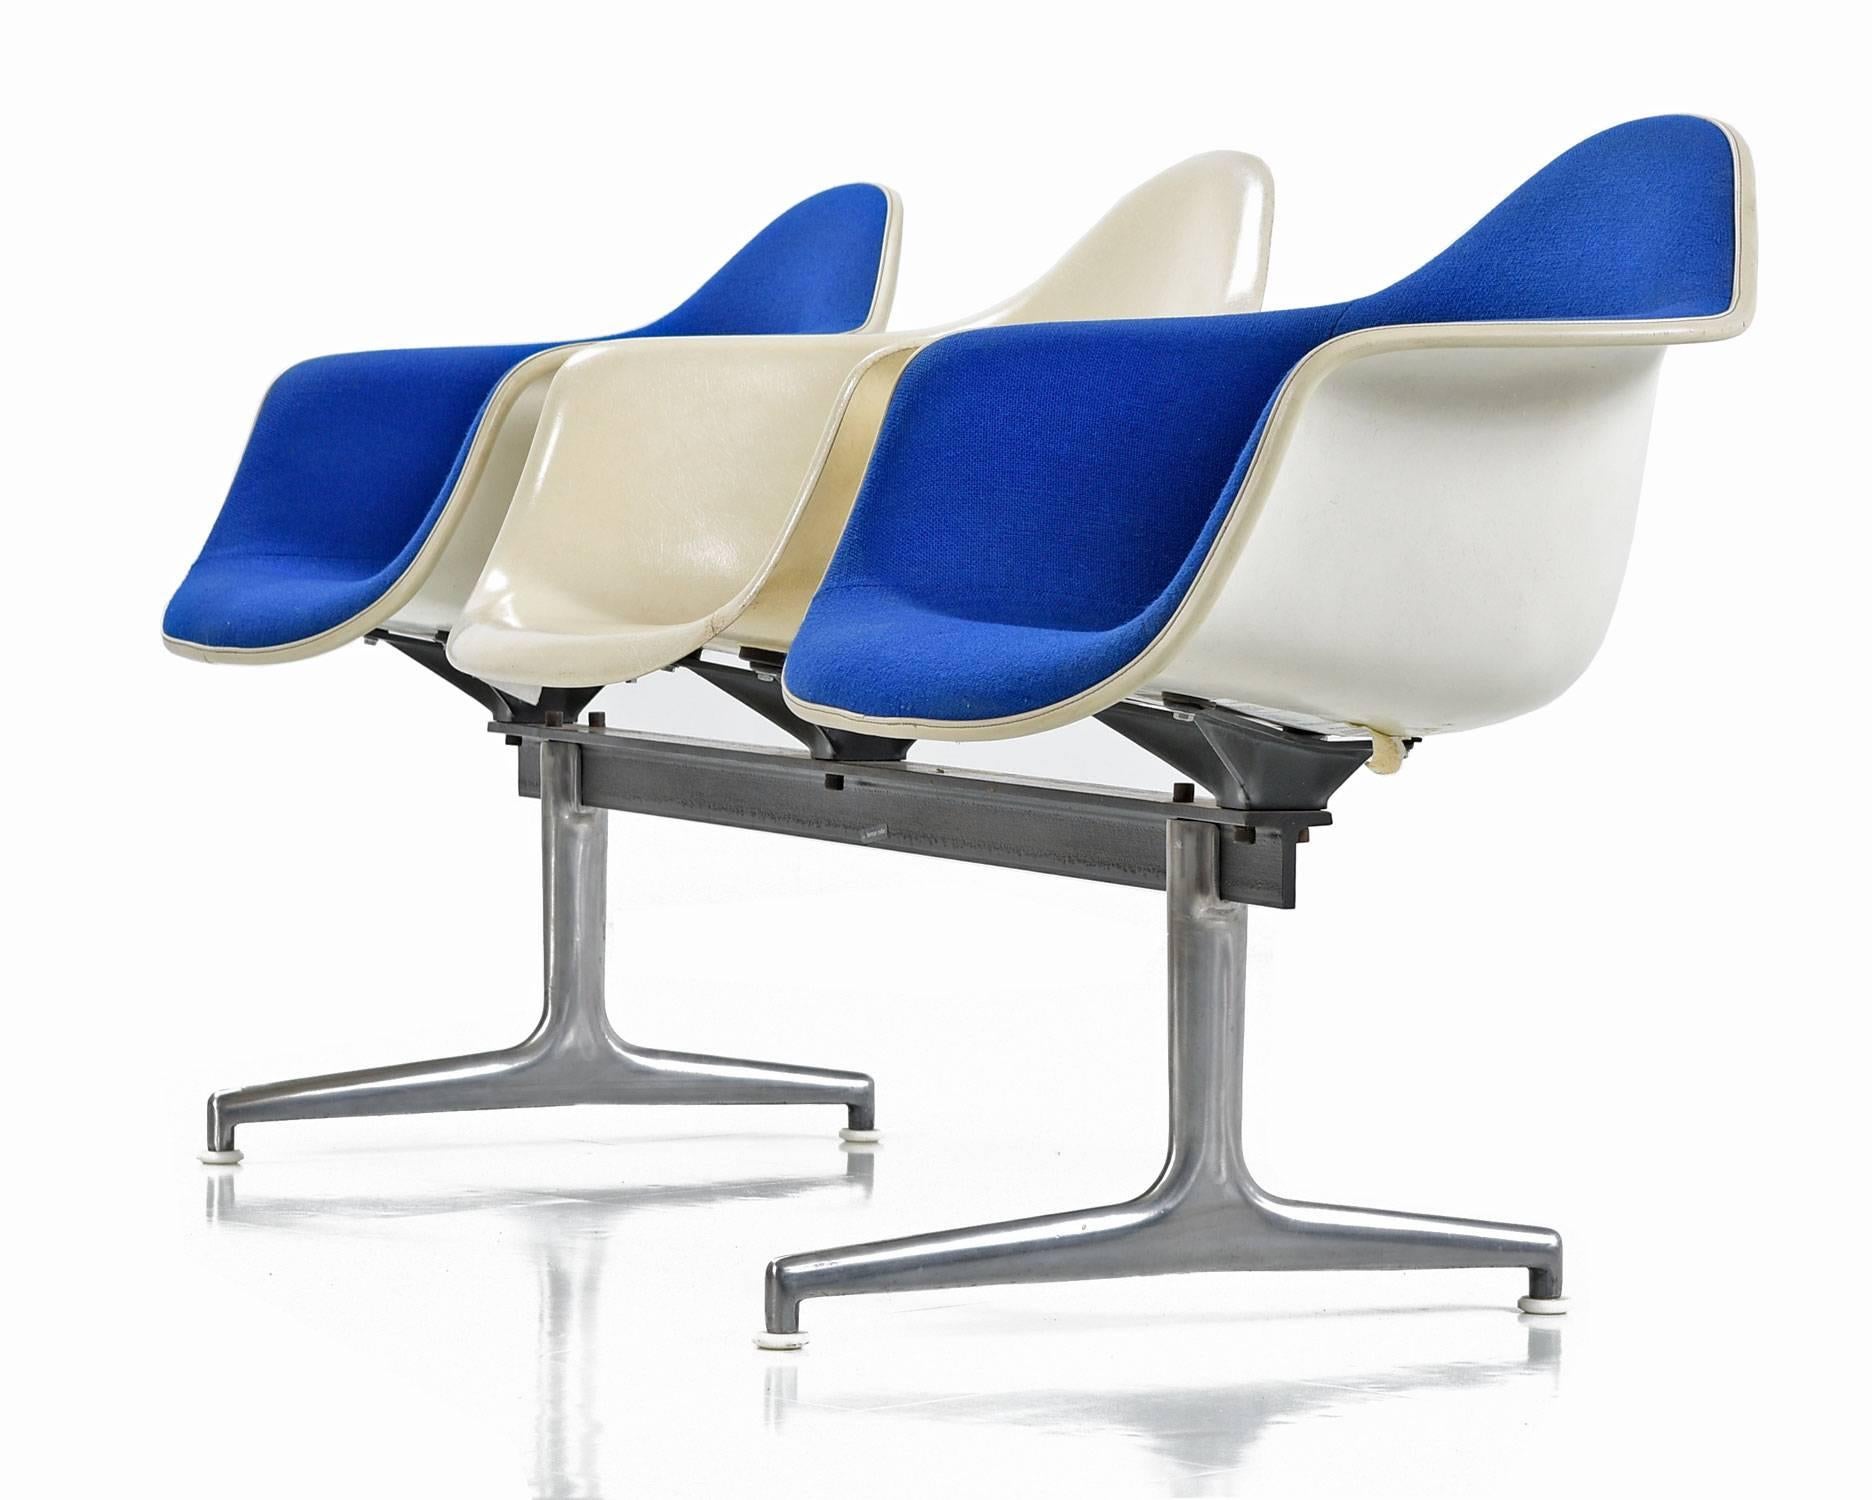 (Two) Shell chairs seats in original blue fabric and (one) off-white fiberglass seat positioned in the center sit atop a metal and aluminum frame. Originally used in commercial settings, this Industrial grade bench can be seamlessly integrated in a